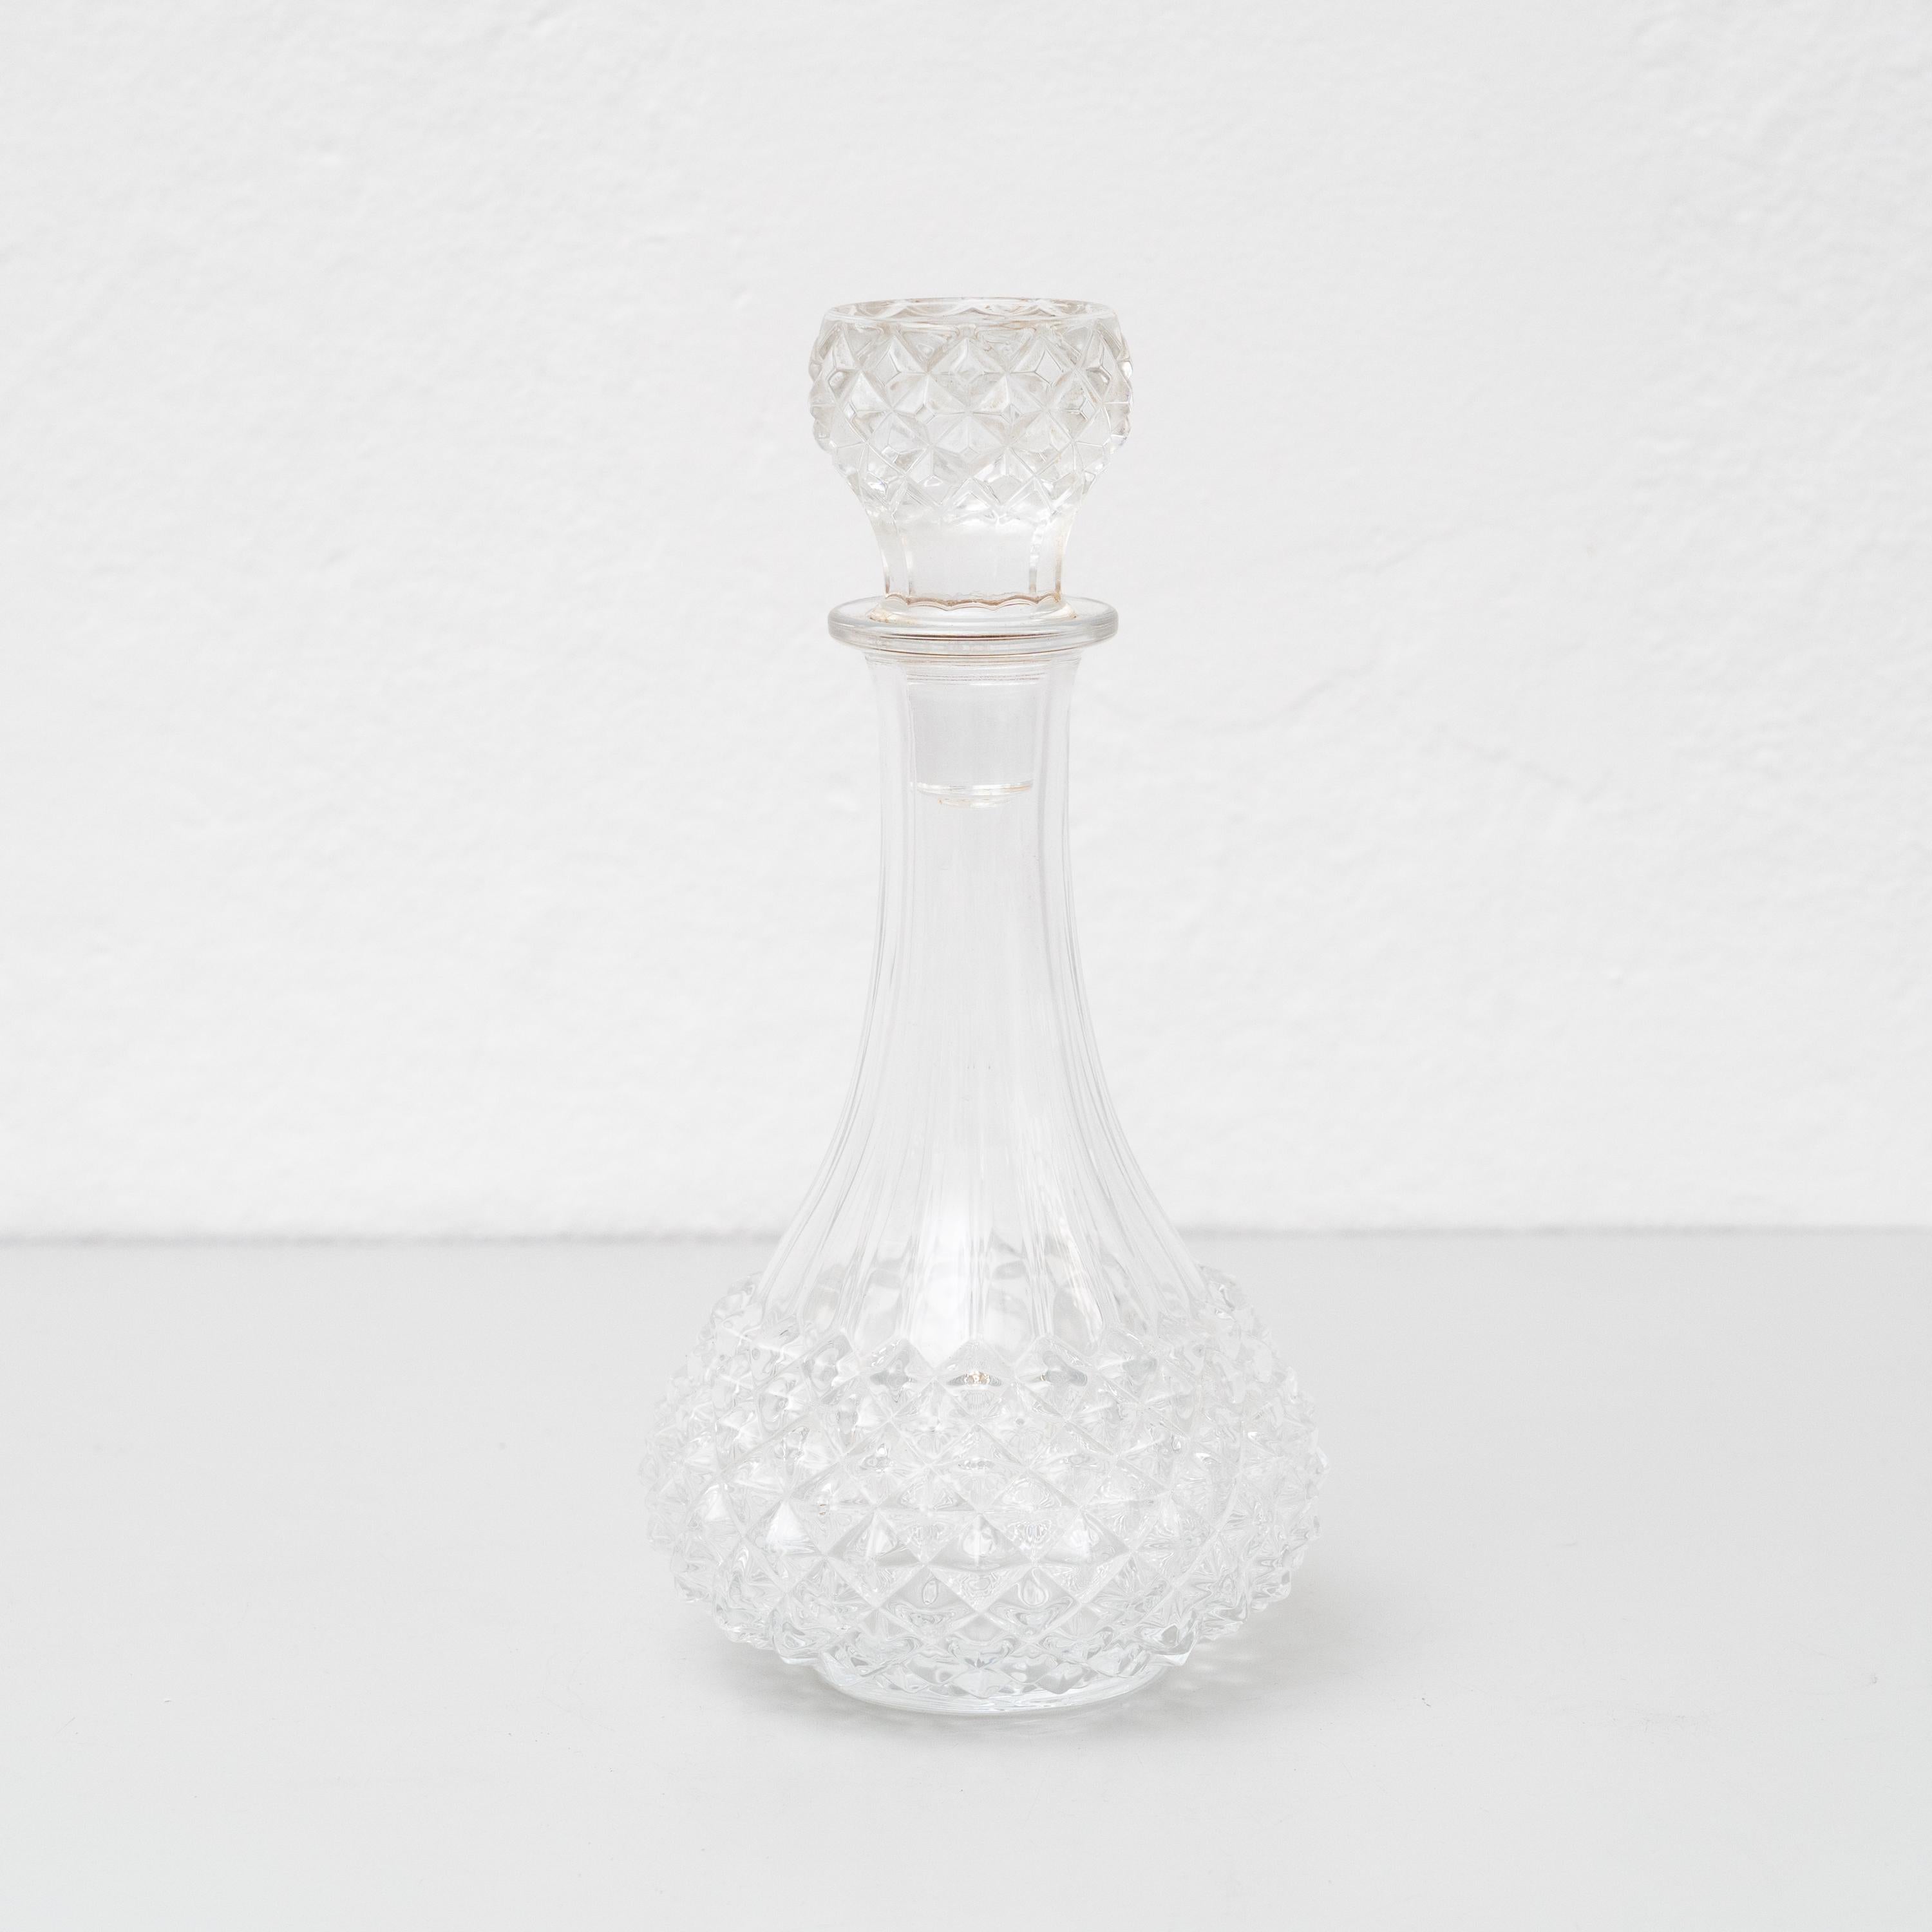 Rustic  Vintage Glass Vase with Diamond Capped Style, Circa 1930  For Sale